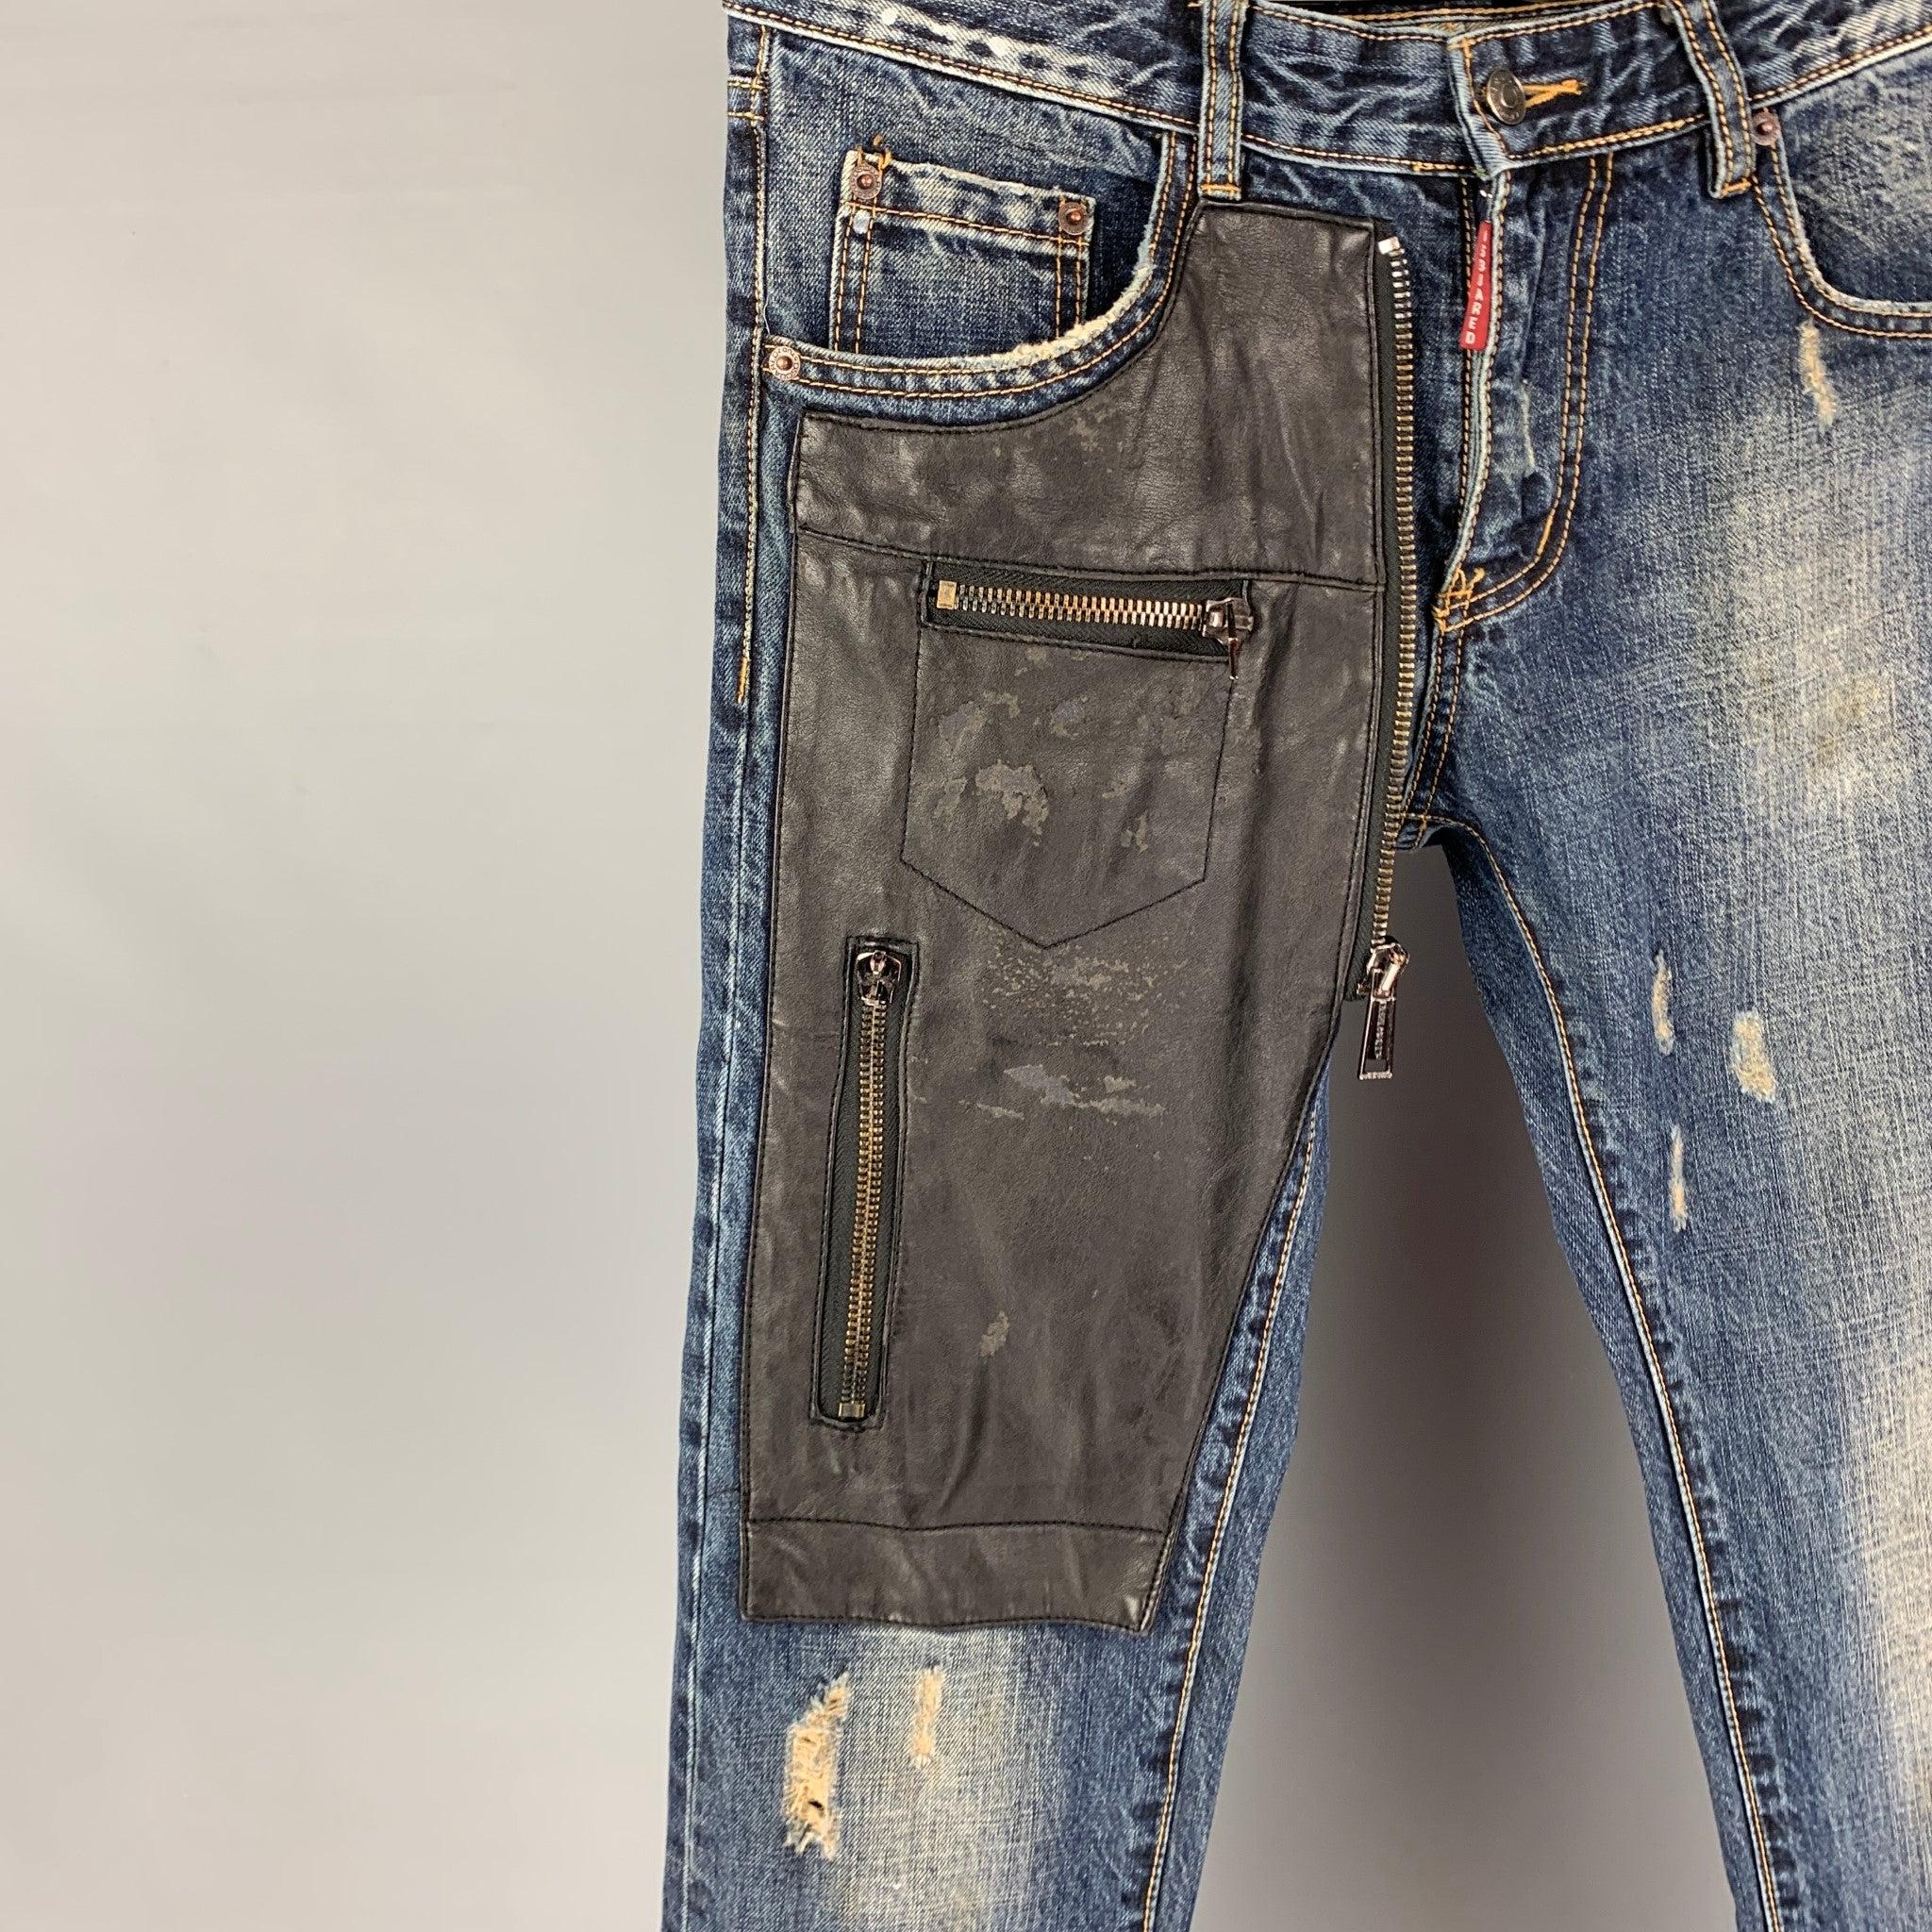 DSQUARED2 jeans comes in a blue distressed cotton featuring a skinny fit, leather patch details, and a zip fly closure. Made in Italy.
Very Good
Pre-Owned Condition. 

Marked:   32 

Measurements: 
  Waist: 34 inches Rise: 9.5 inches Inseam:
34